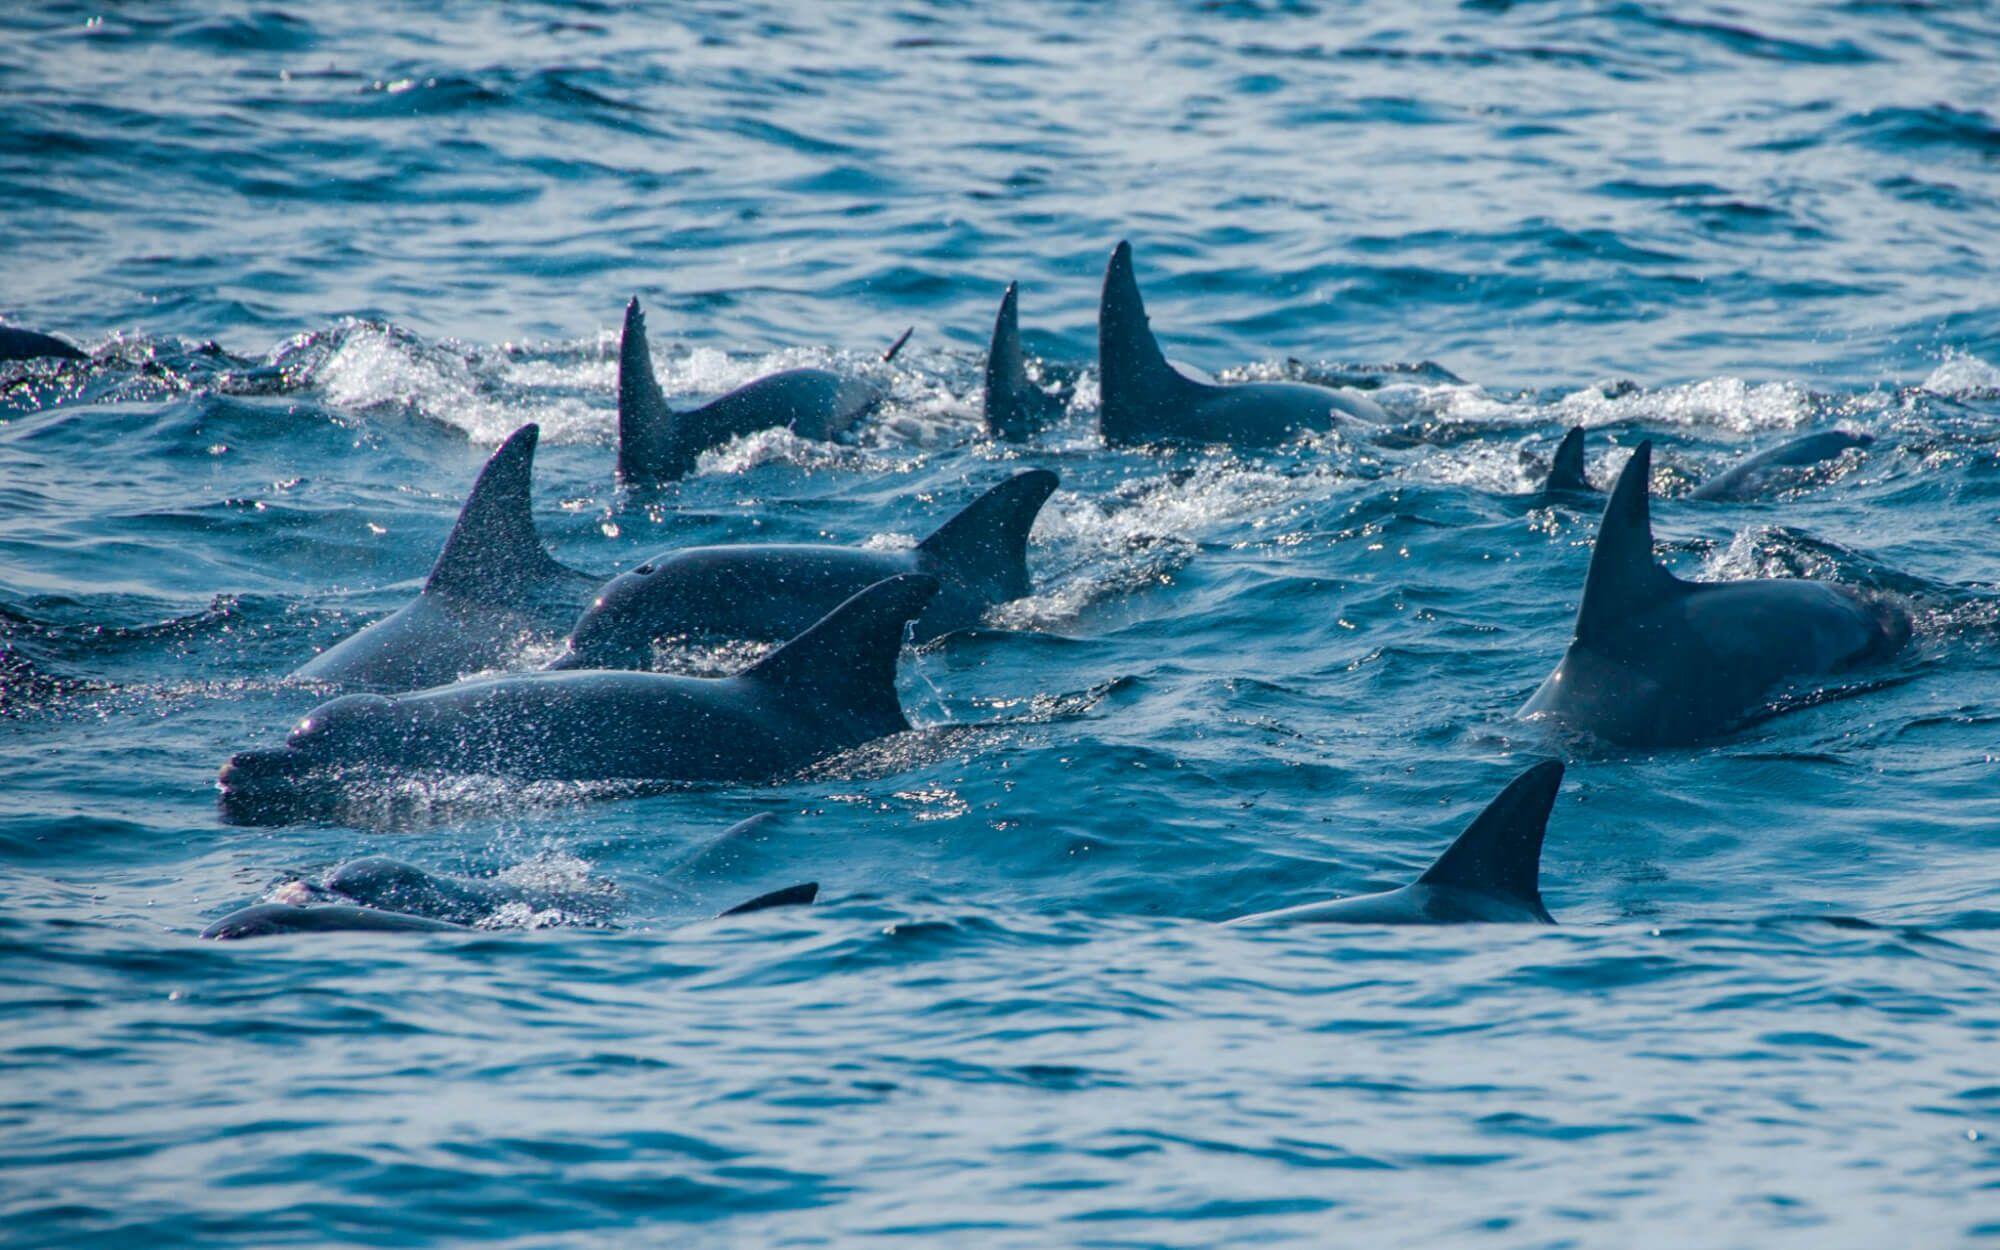 A dolphin pod off the coast of South Africa, on a reef called Aliwal shoal. 
Photographer: Jono Greenway